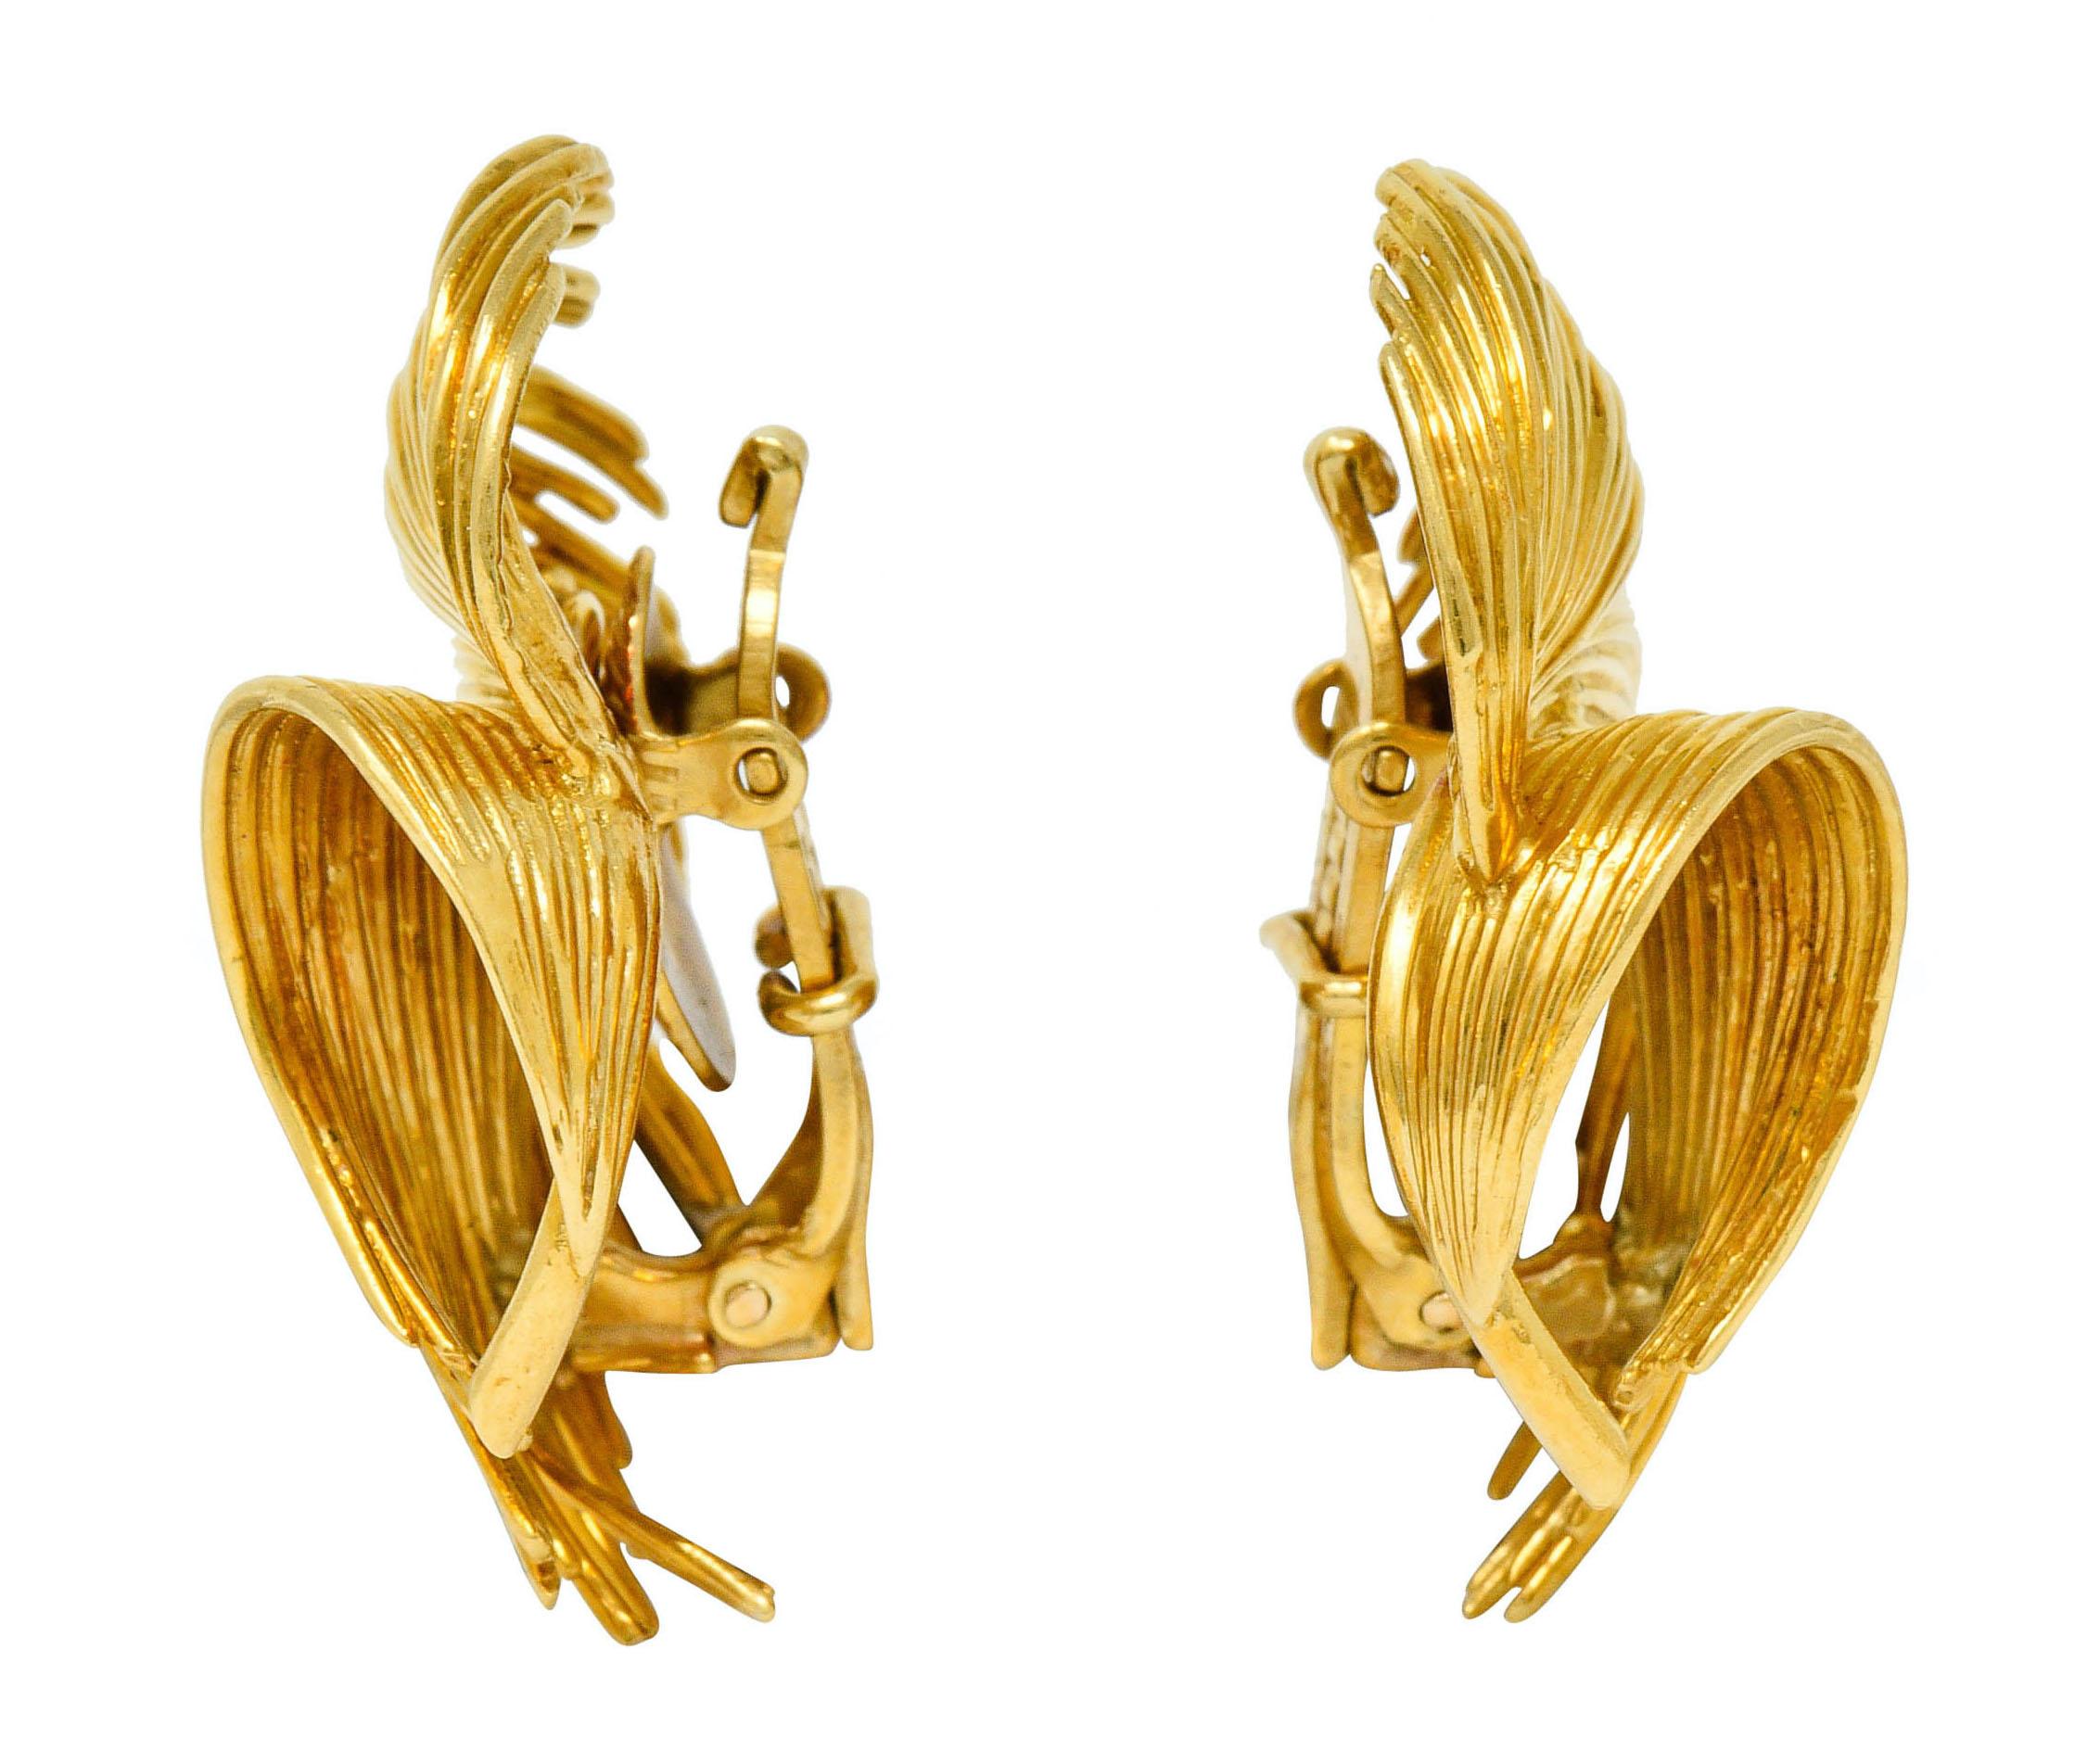 Ear-clip earrings are designed as dynamically formed feathers

Comprised of polished gold wire twisting upon itself

Completed by hinged omega backs with original patent stamp

Fully signed Tiffany & Co.

Stamped 18Kt for 18 karat gold

Circa: